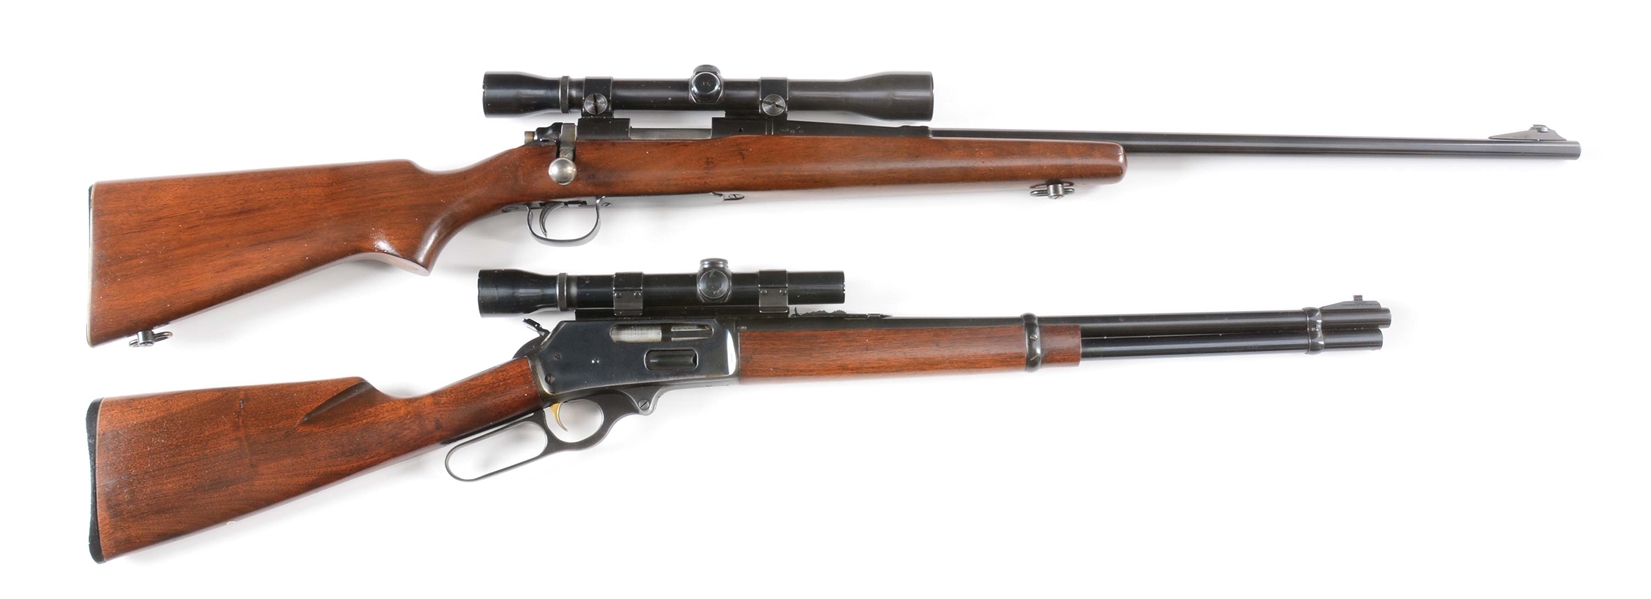 (C) LOT OF TWO: TWO CLASSIC SPORTING RIFLES FROM REMINGTON & MARLIN